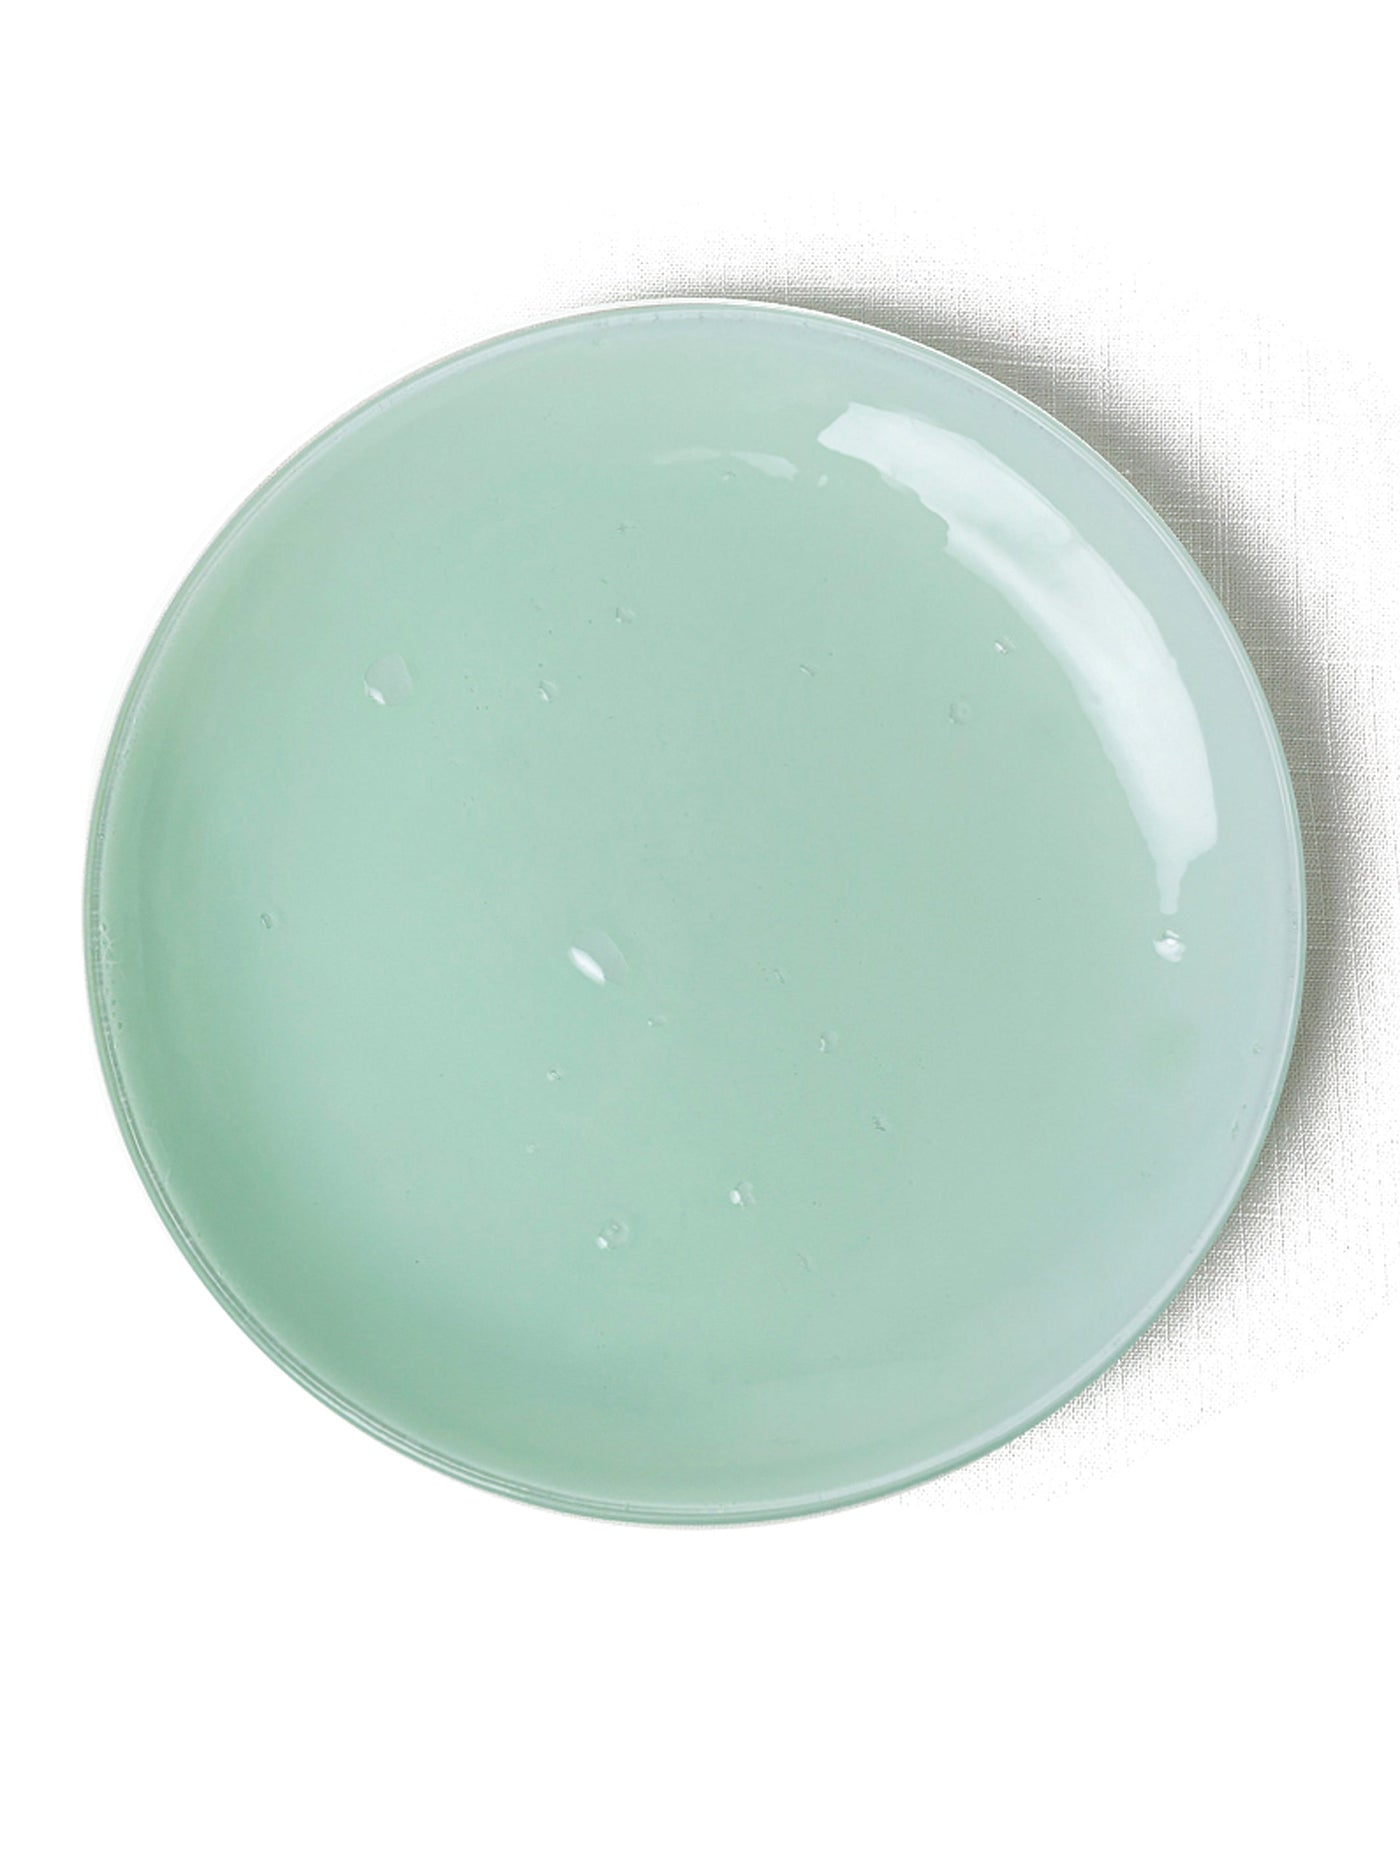 Handmade Glass Salad/Dessert Plate in Mint by Caju Collective